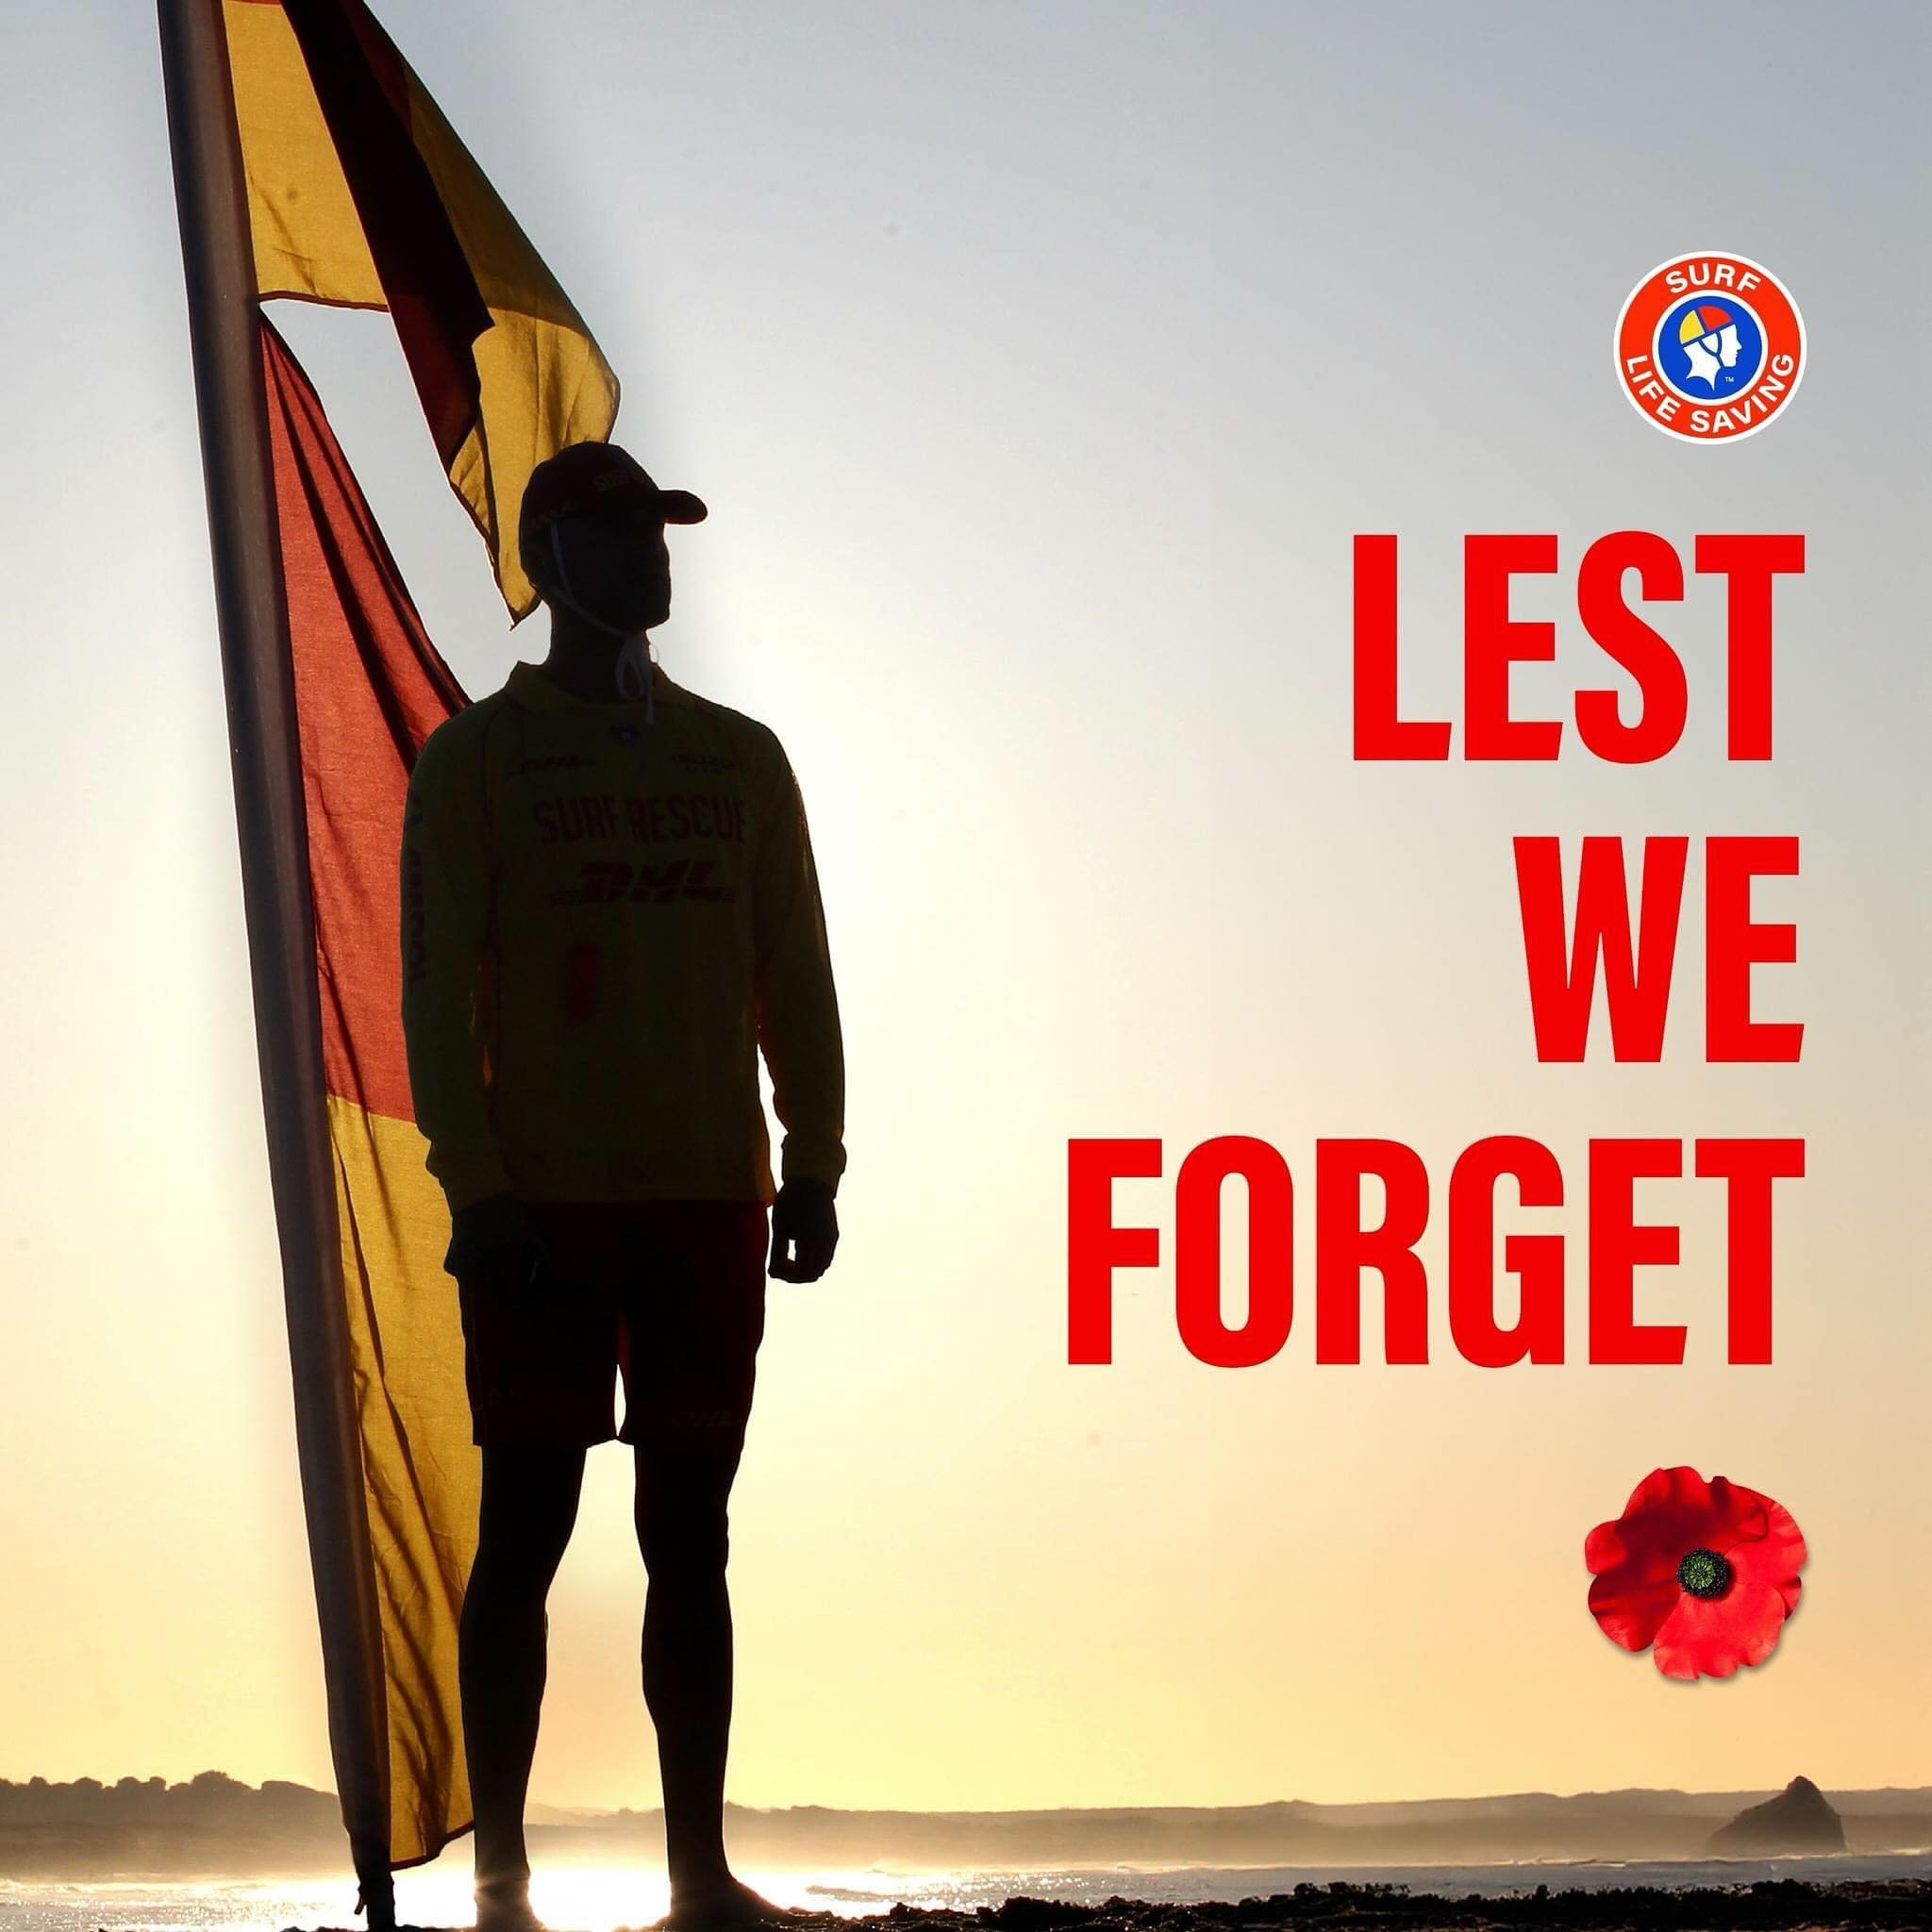 &ldquo;They shall grow not old, as we that are left grow old; 
Age shall not weary them, nor the years condemn. 
At the going down of the sun and in the morning,
We will remember them.&rdquo;